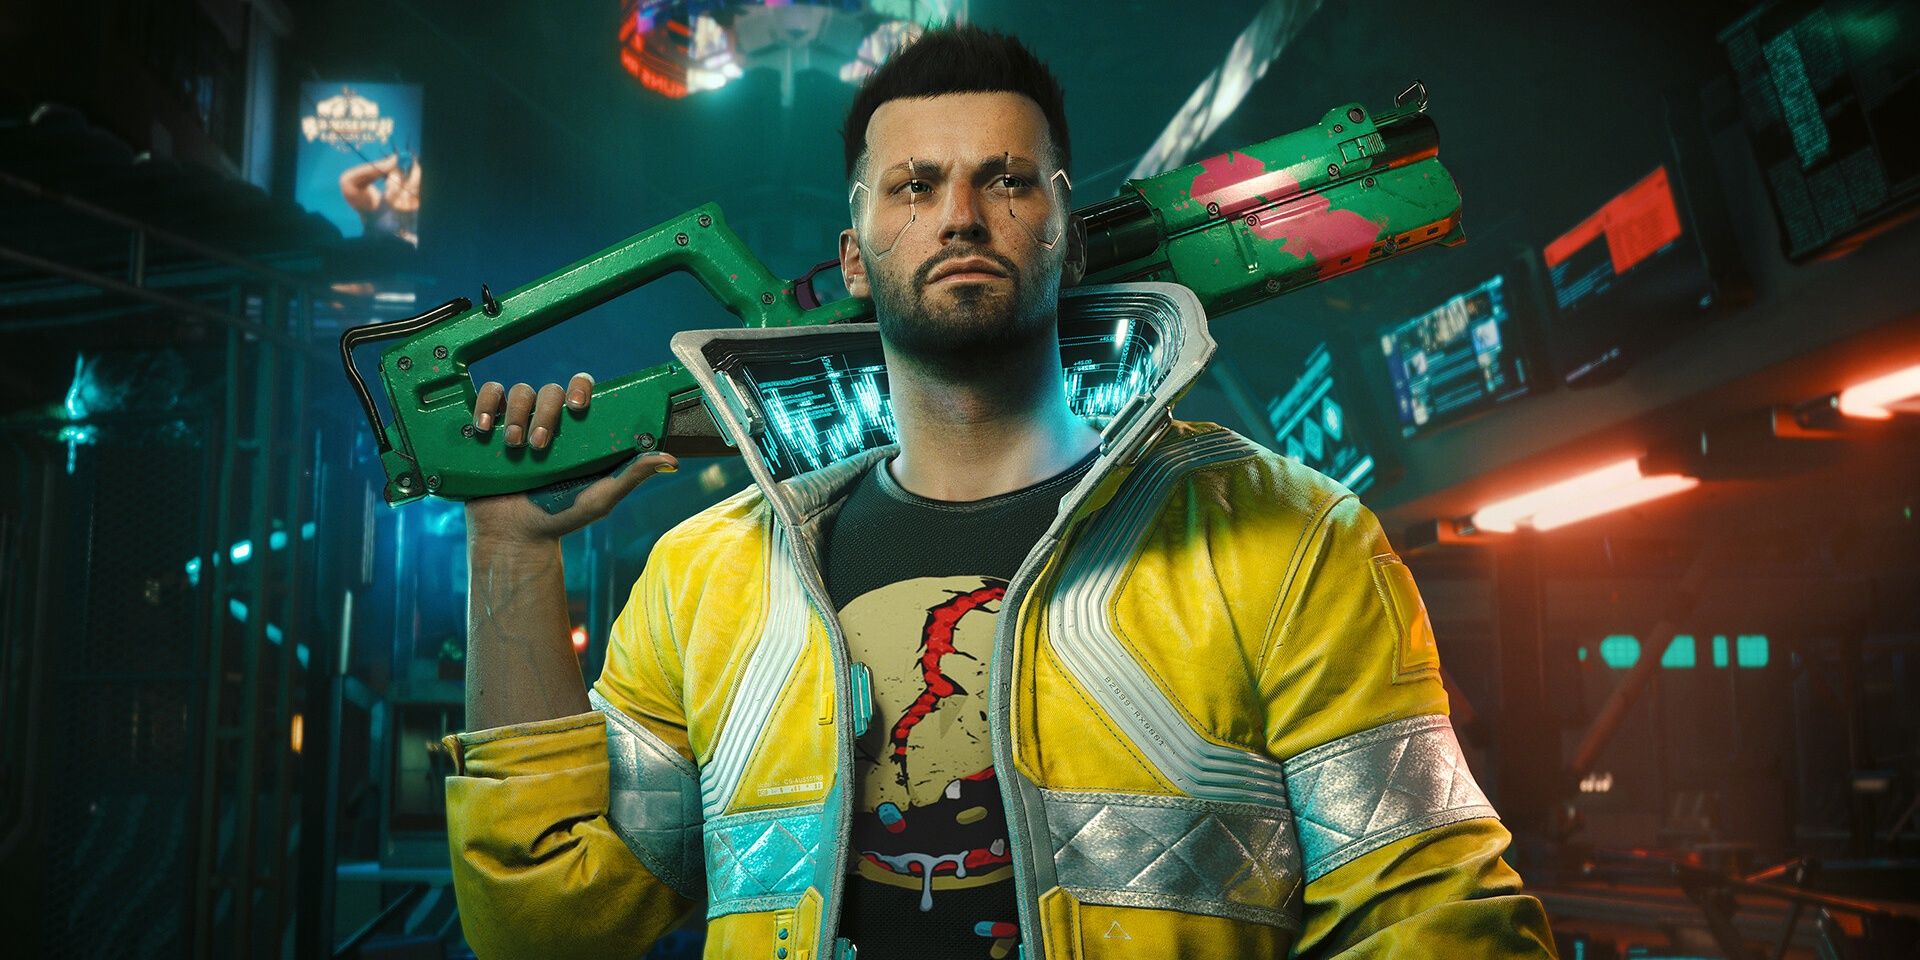 A potential look for the protagonist with a green/pink gun in Cyberpunk 2077